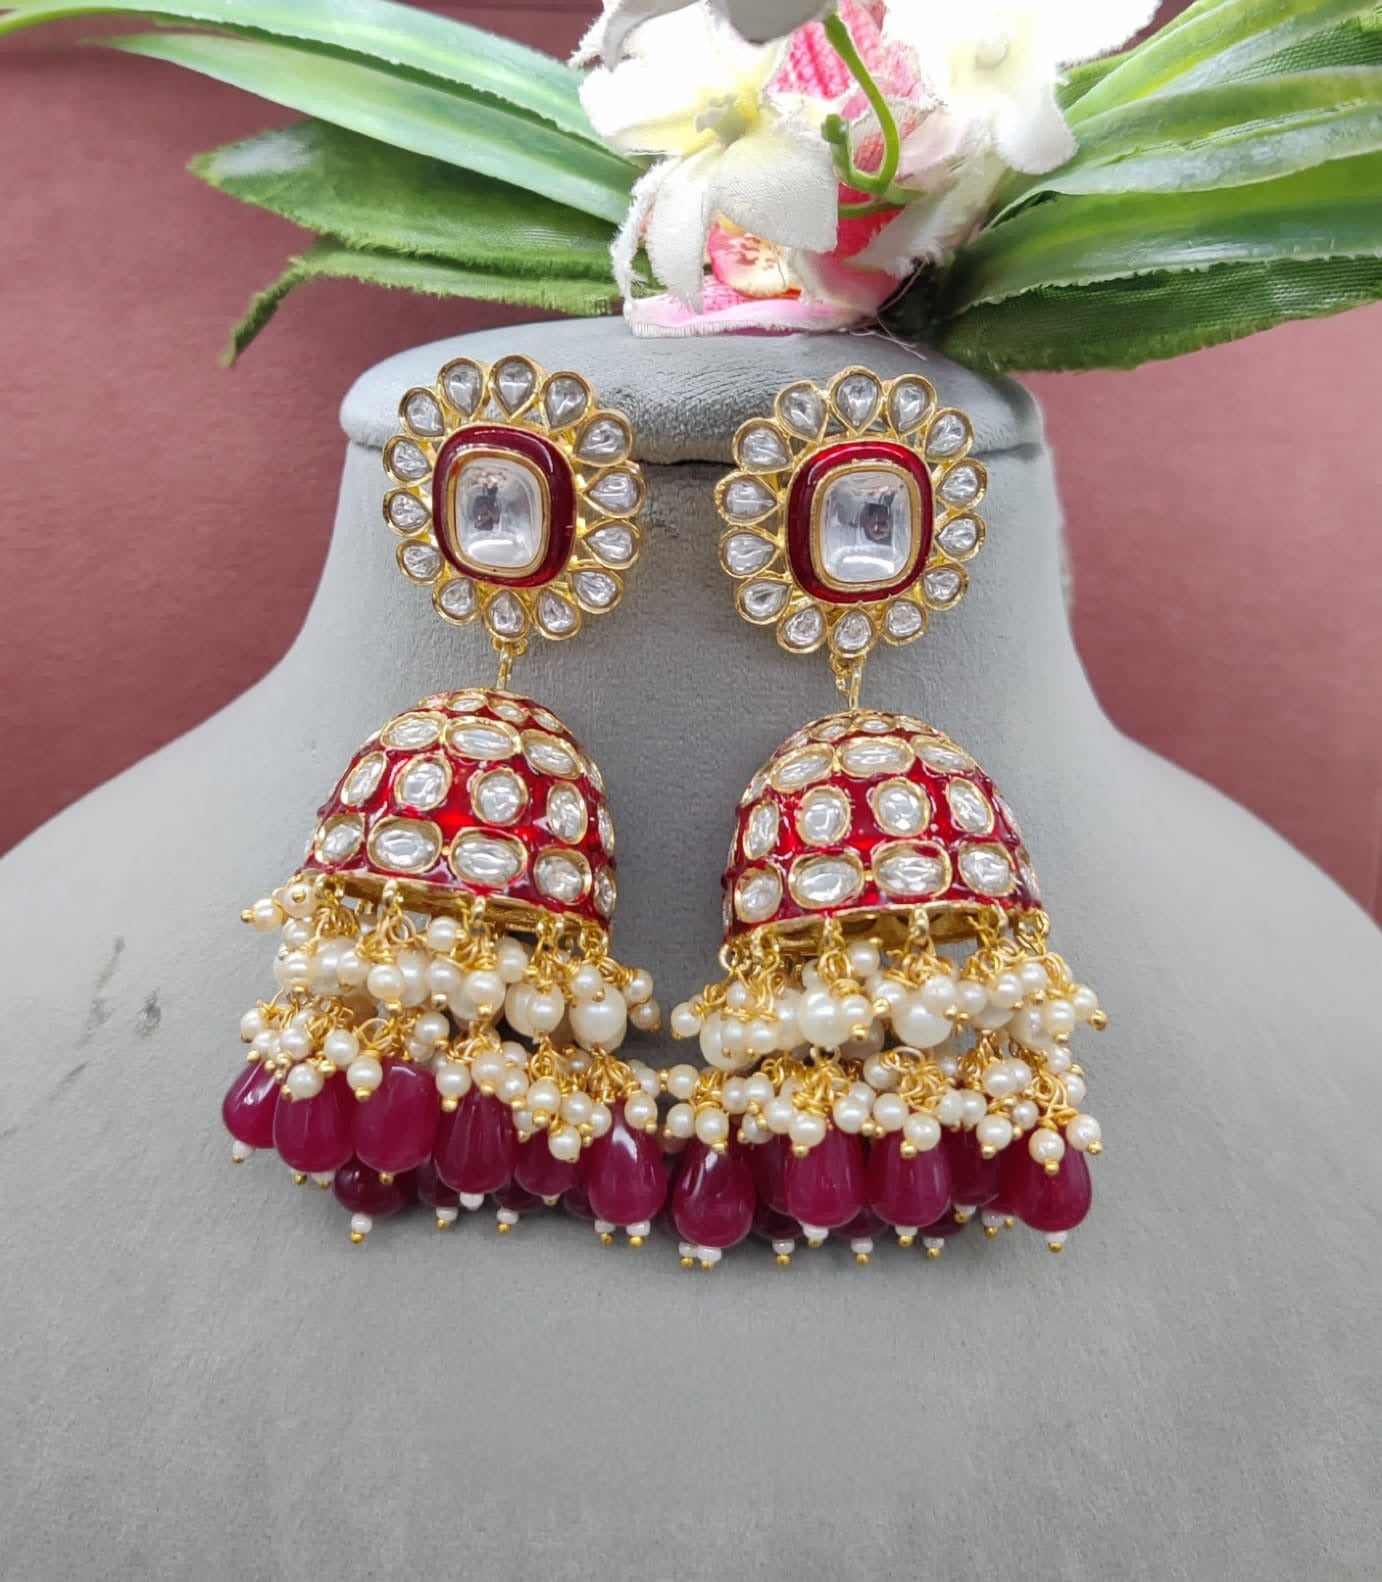 High-Quality Kundan Earrings for Timeless Elegance and Intricate Craftsmanship